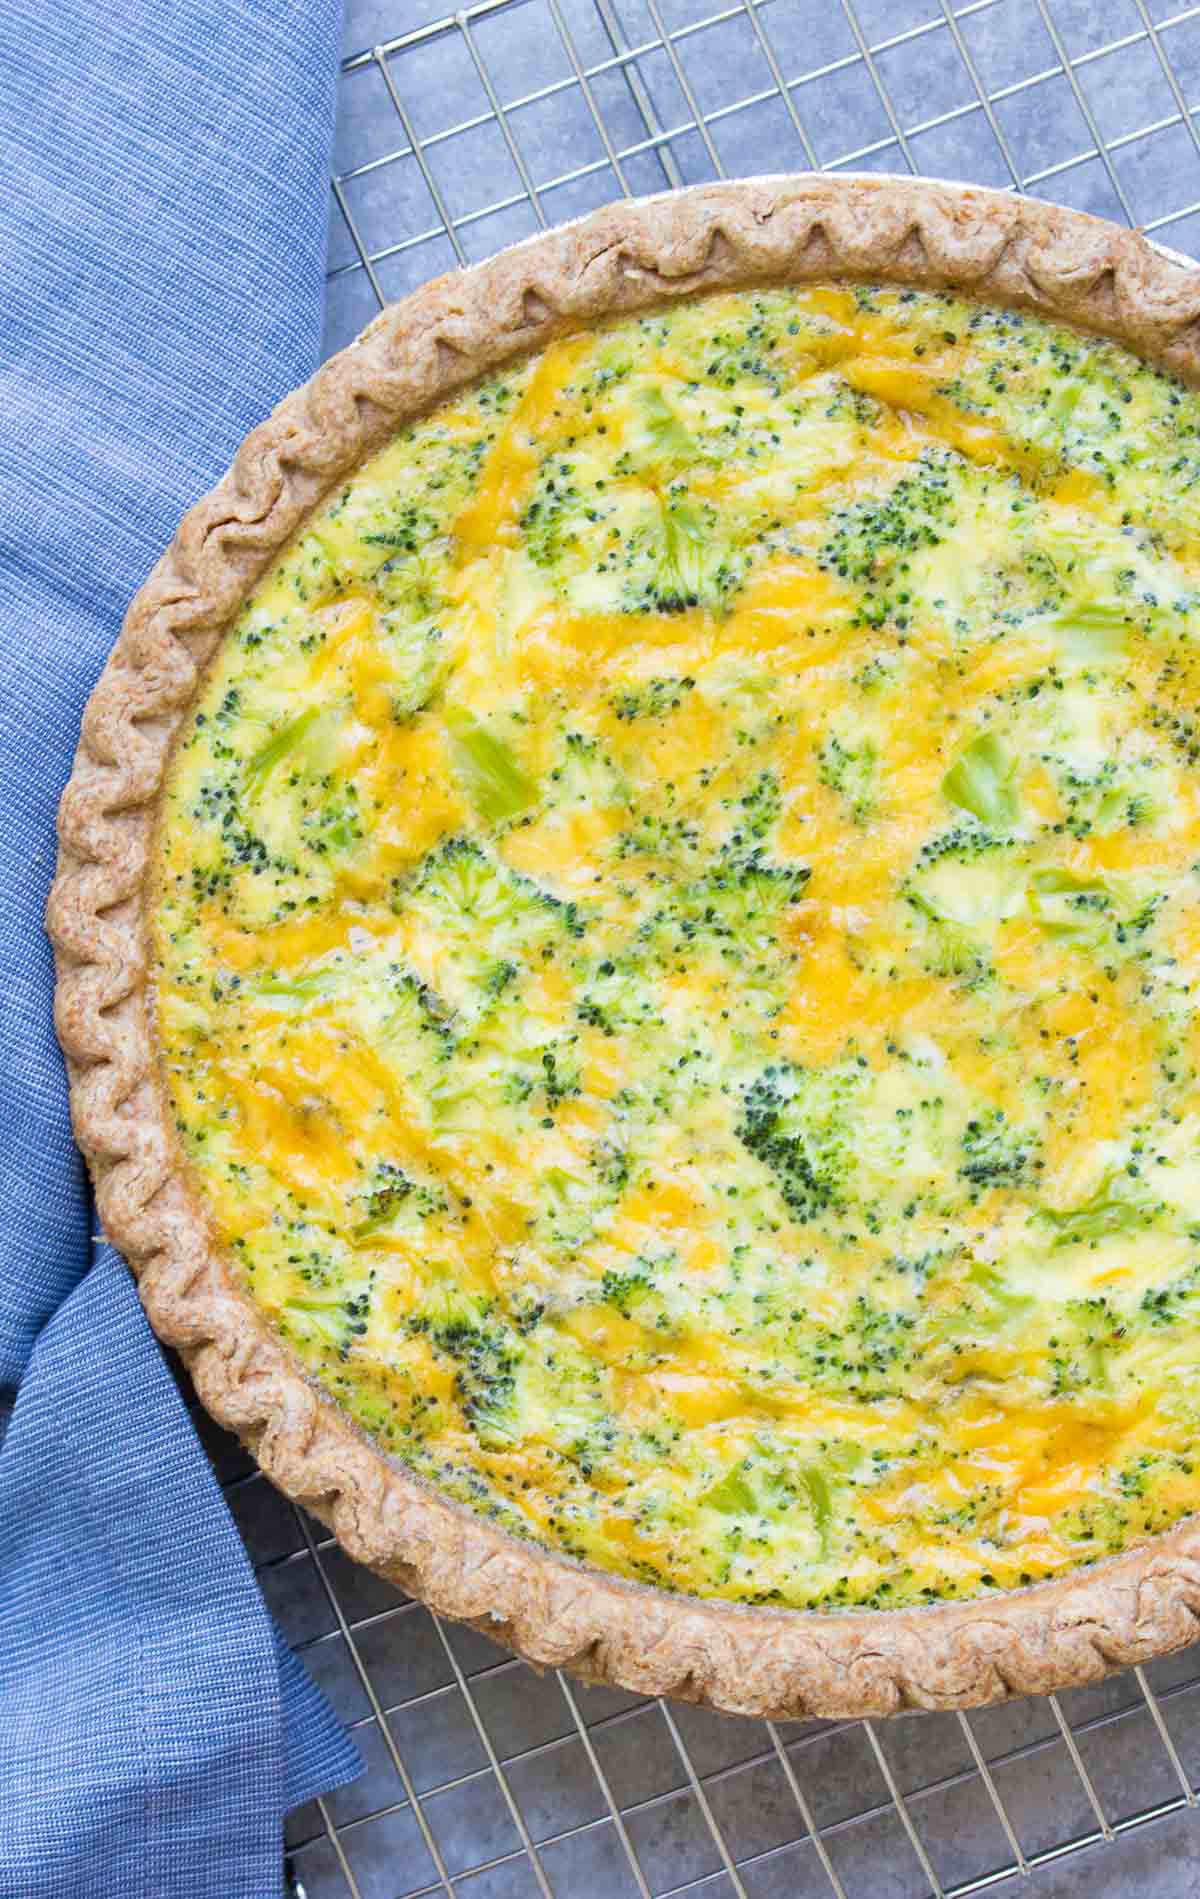 An easy broccoli cheese quiche recipe, made with just 5 ingredients! This broccoli cheddar quiche is a family favorite for dinner, breakfast or lunch!